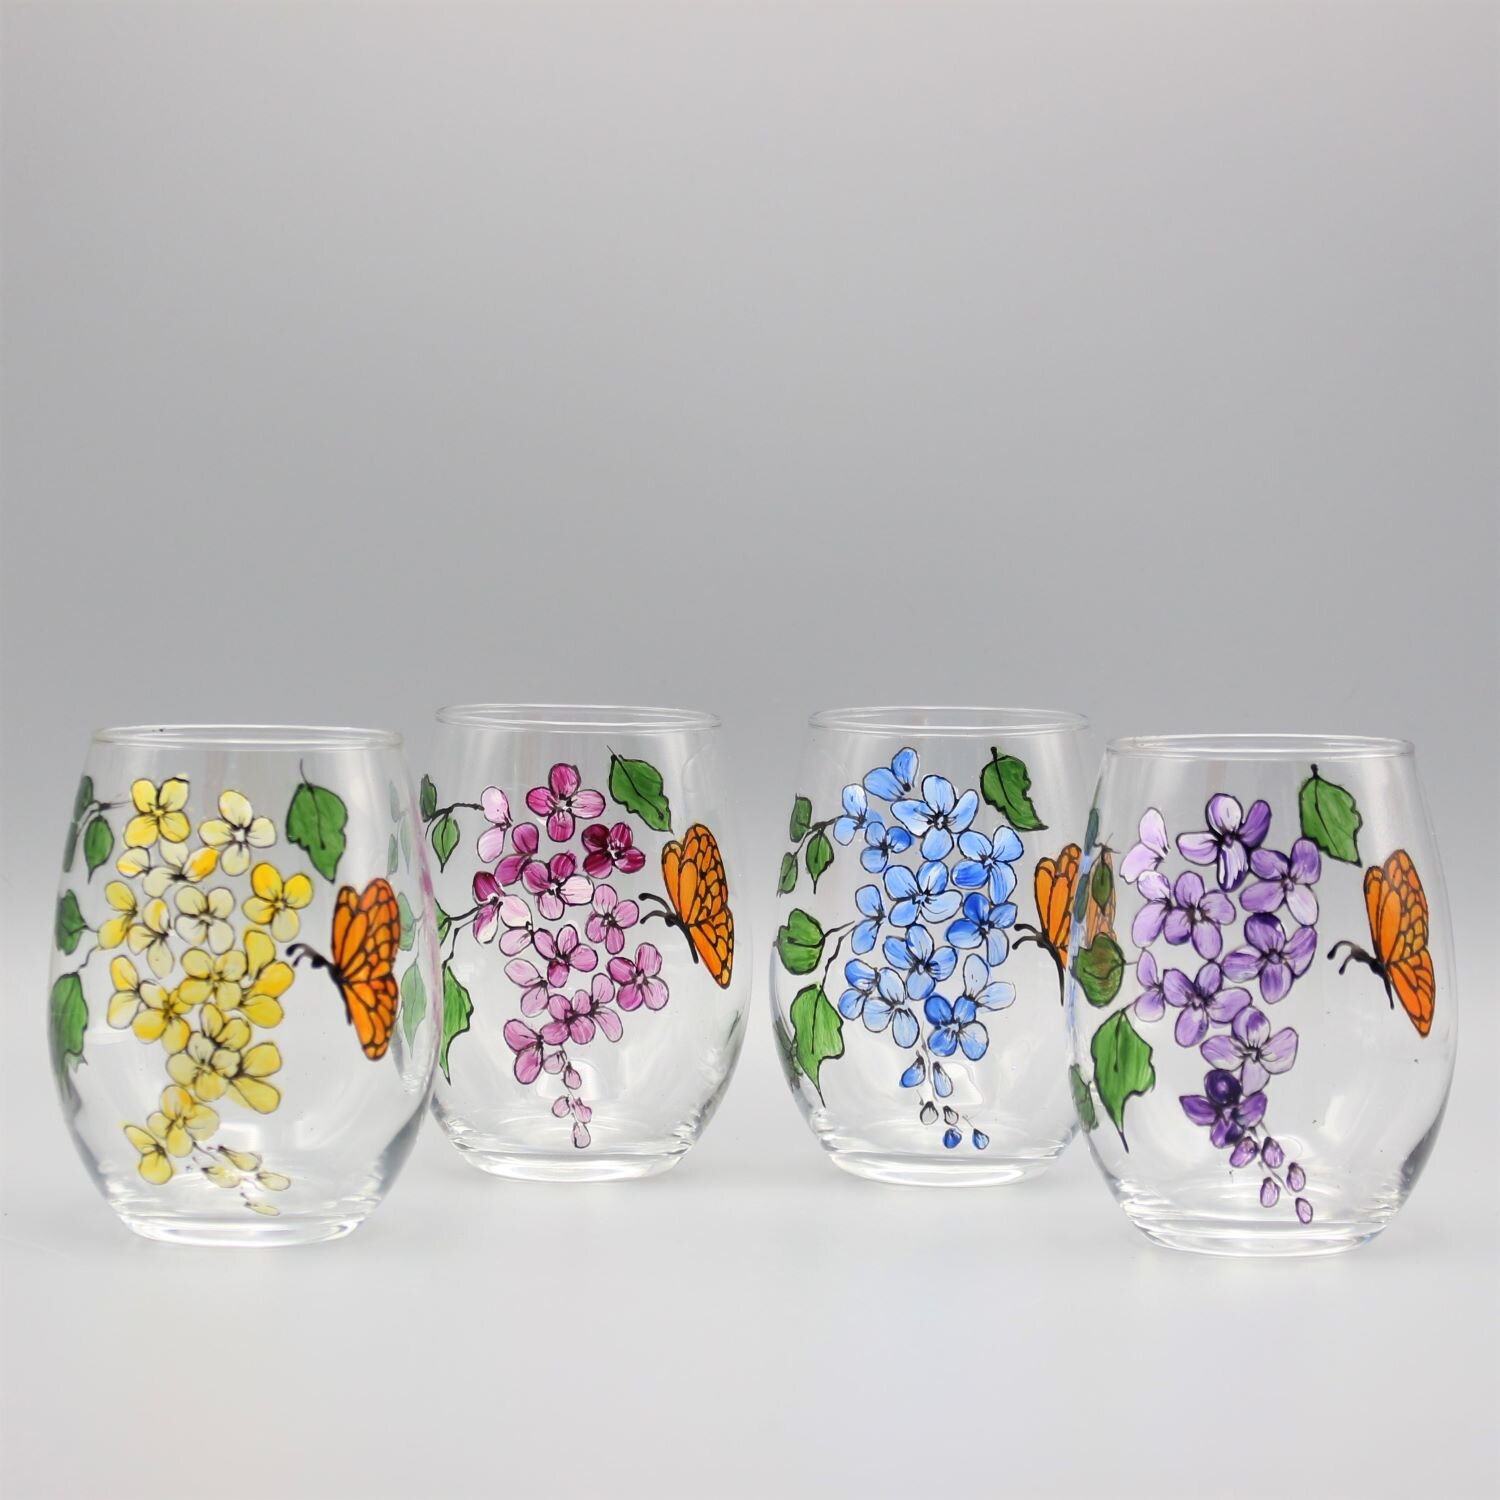 https://images.squarespace-cdn.com/content/v1/5570dc78e4b0bbe8e5cab3d0/1583989440580-SAC4MQH6TQ07UTOY1ZPS/butterfly_and_flower_stemless_wine_glasses.JPG?format=1500w